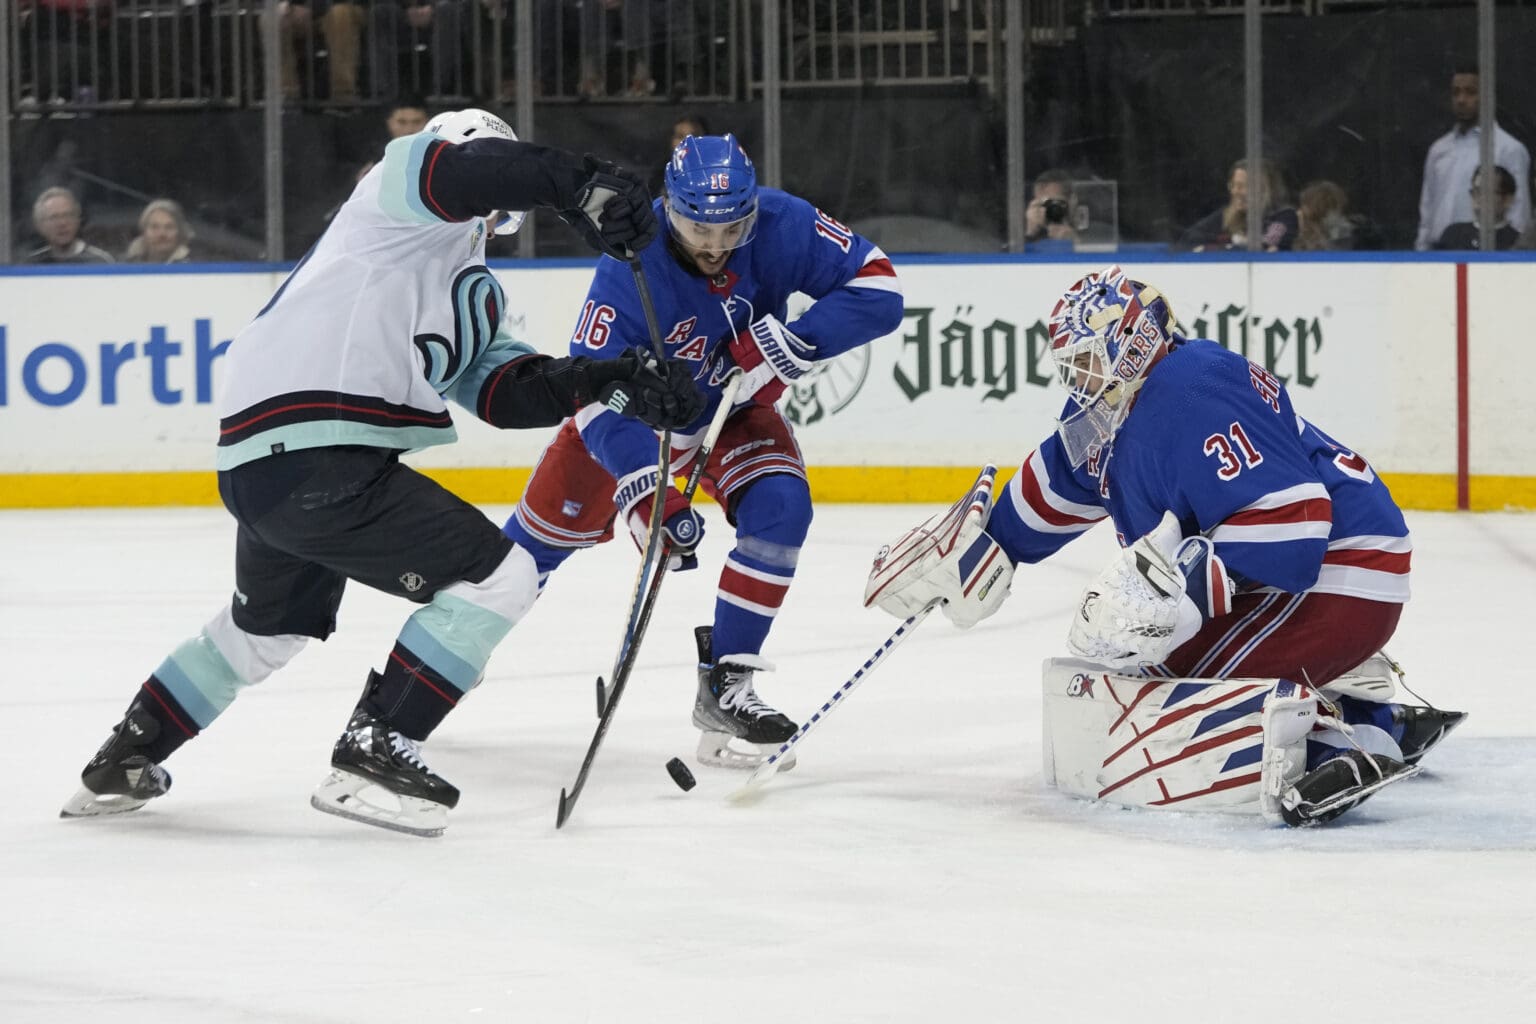 New York Rangers goaltender Igor Shesterkin leans to block the shot as two other players battle for control for the puck.